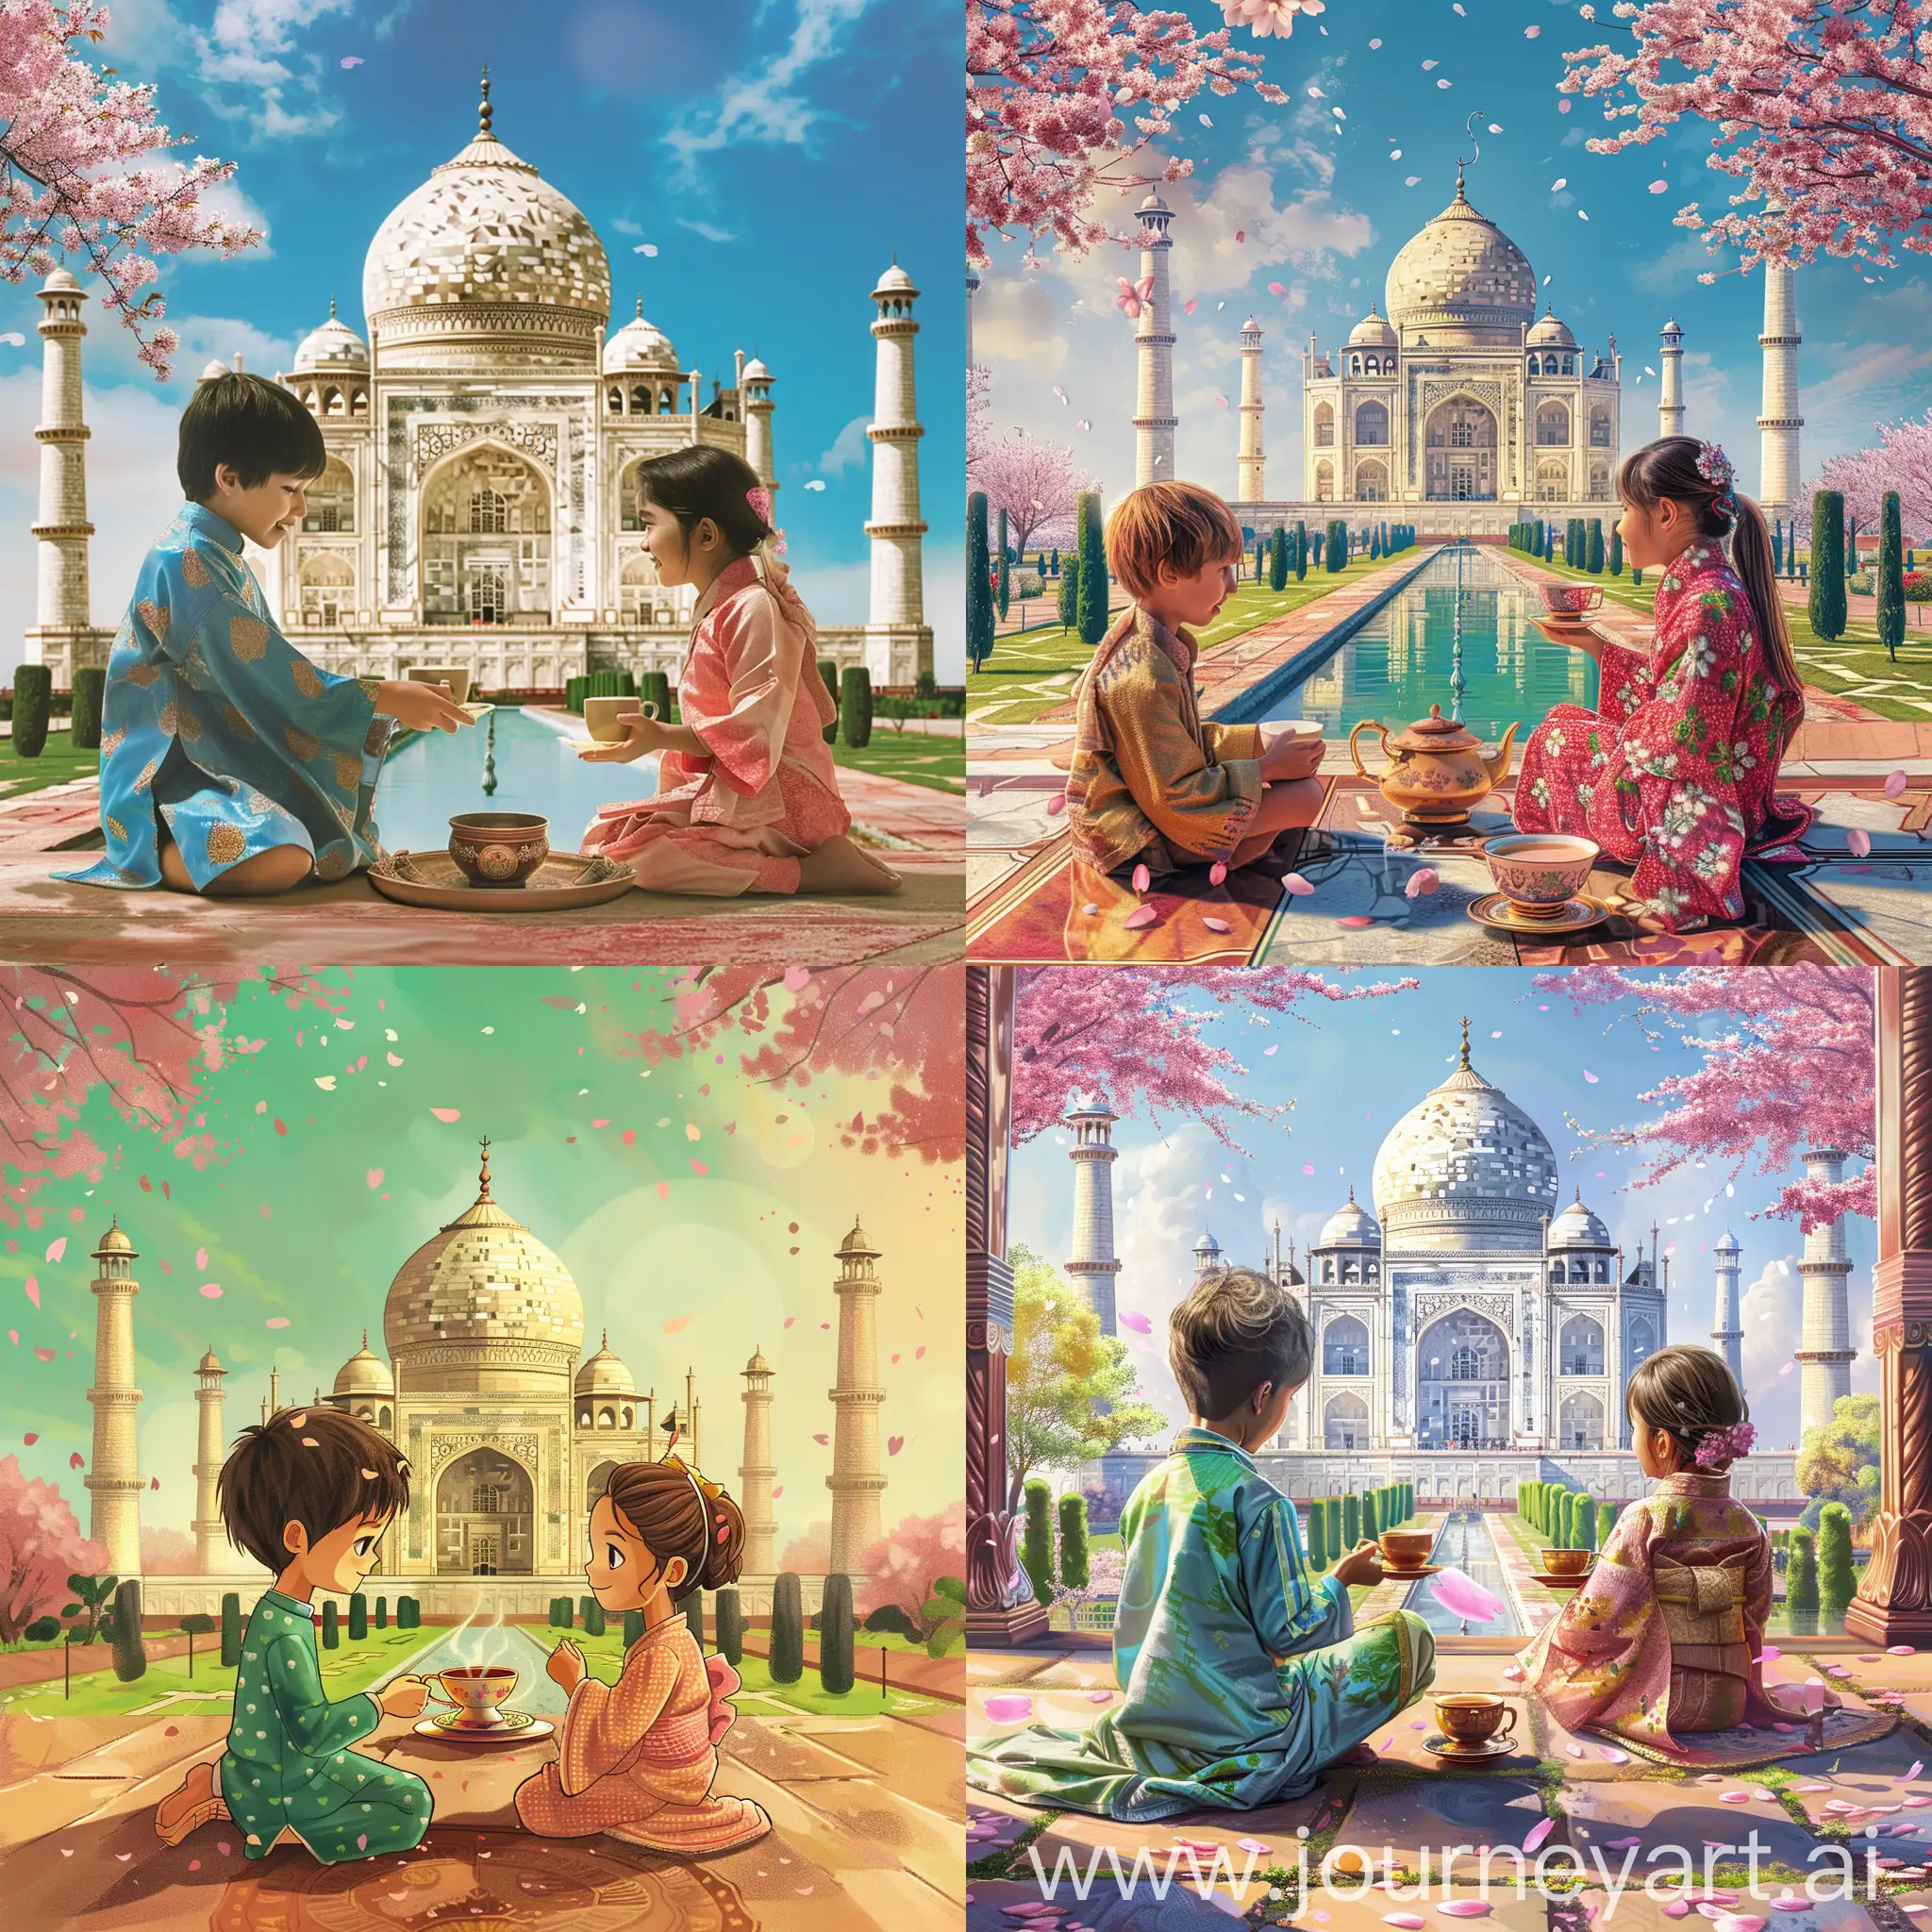 a young indian boy and a japanese girl having tea in front of taj mahal in the season of sakura.
